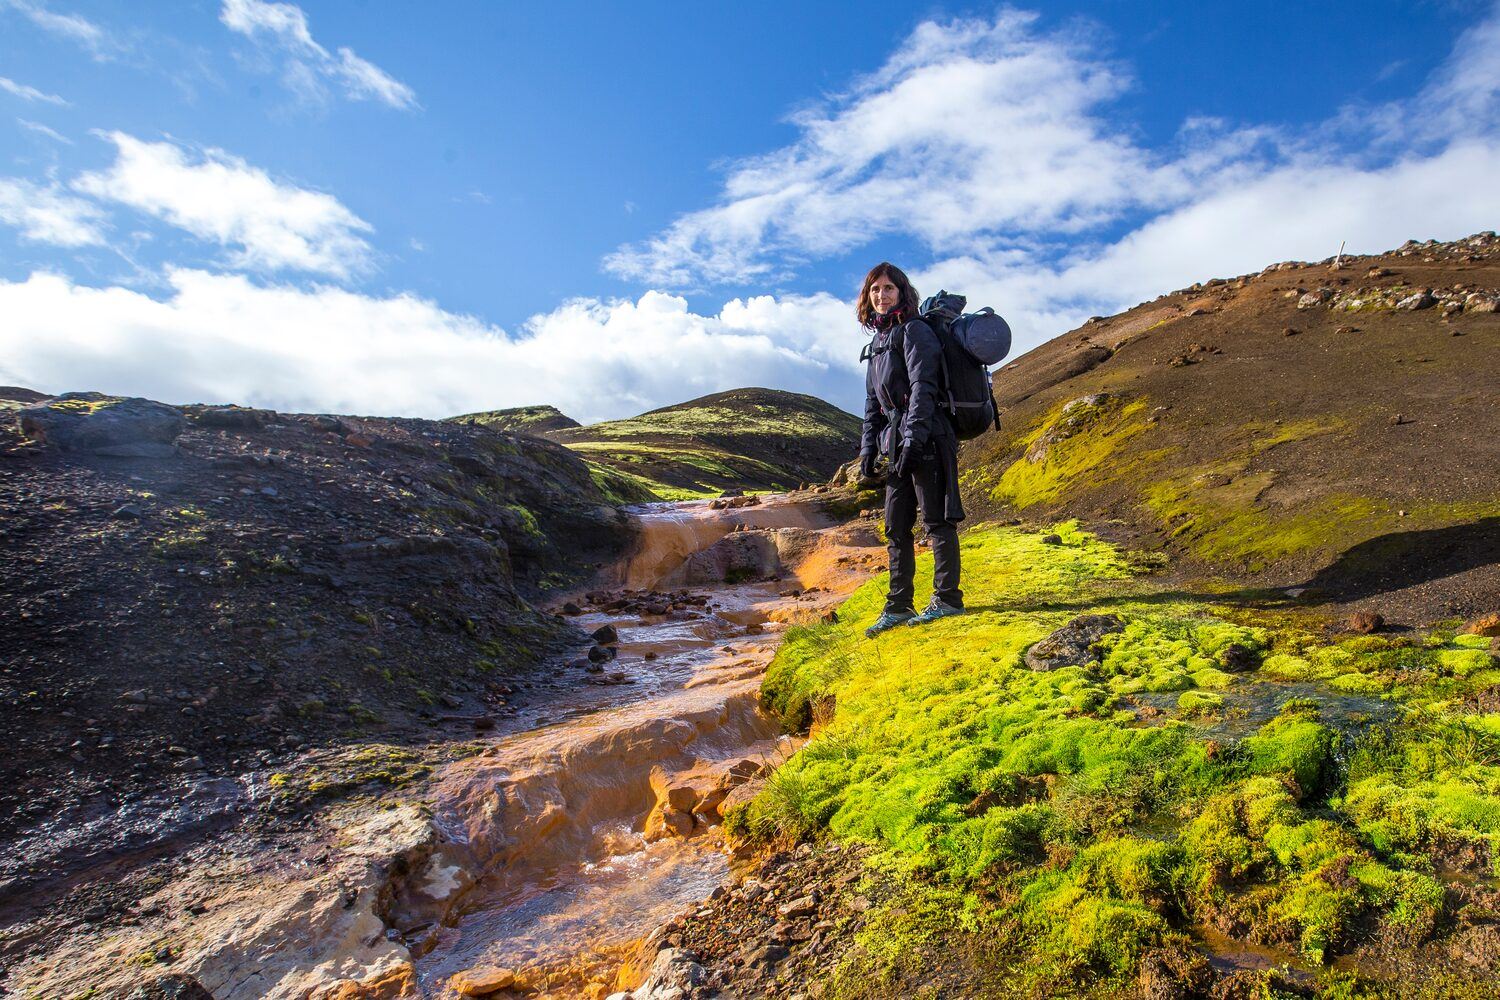 Woman in outdoor gear with backpack on hiking trail in Landmannalaugar, Iceland.